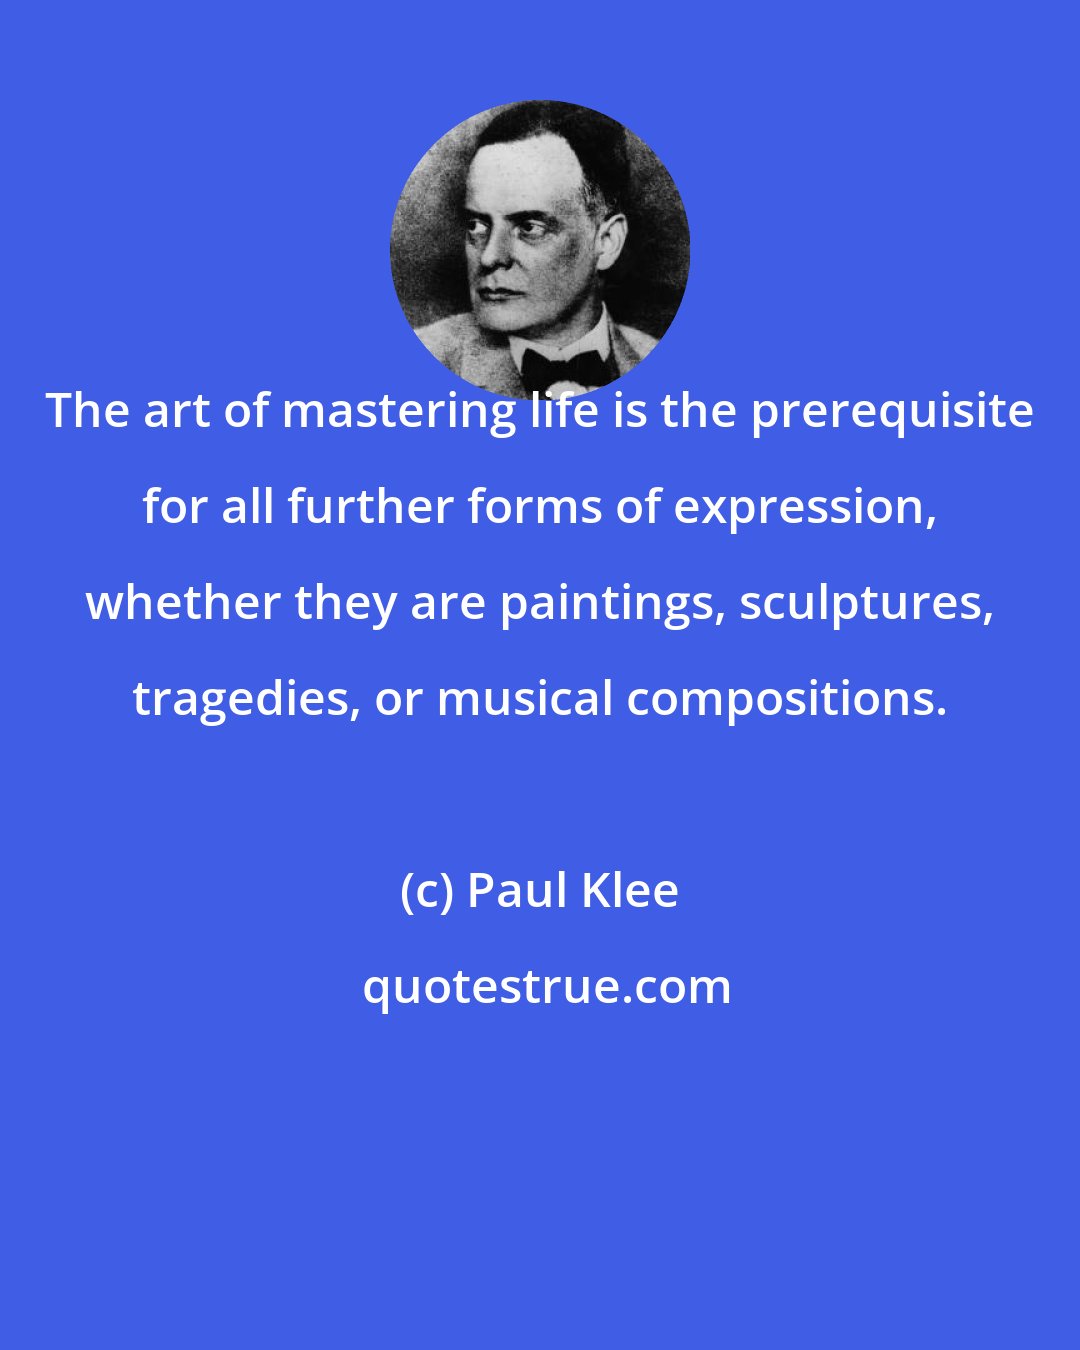 Paul Klee: The art of mastering life is the prerequisite for all further forms of expression, whether they are paintings, sculptures, tragedies, or musical compositions.